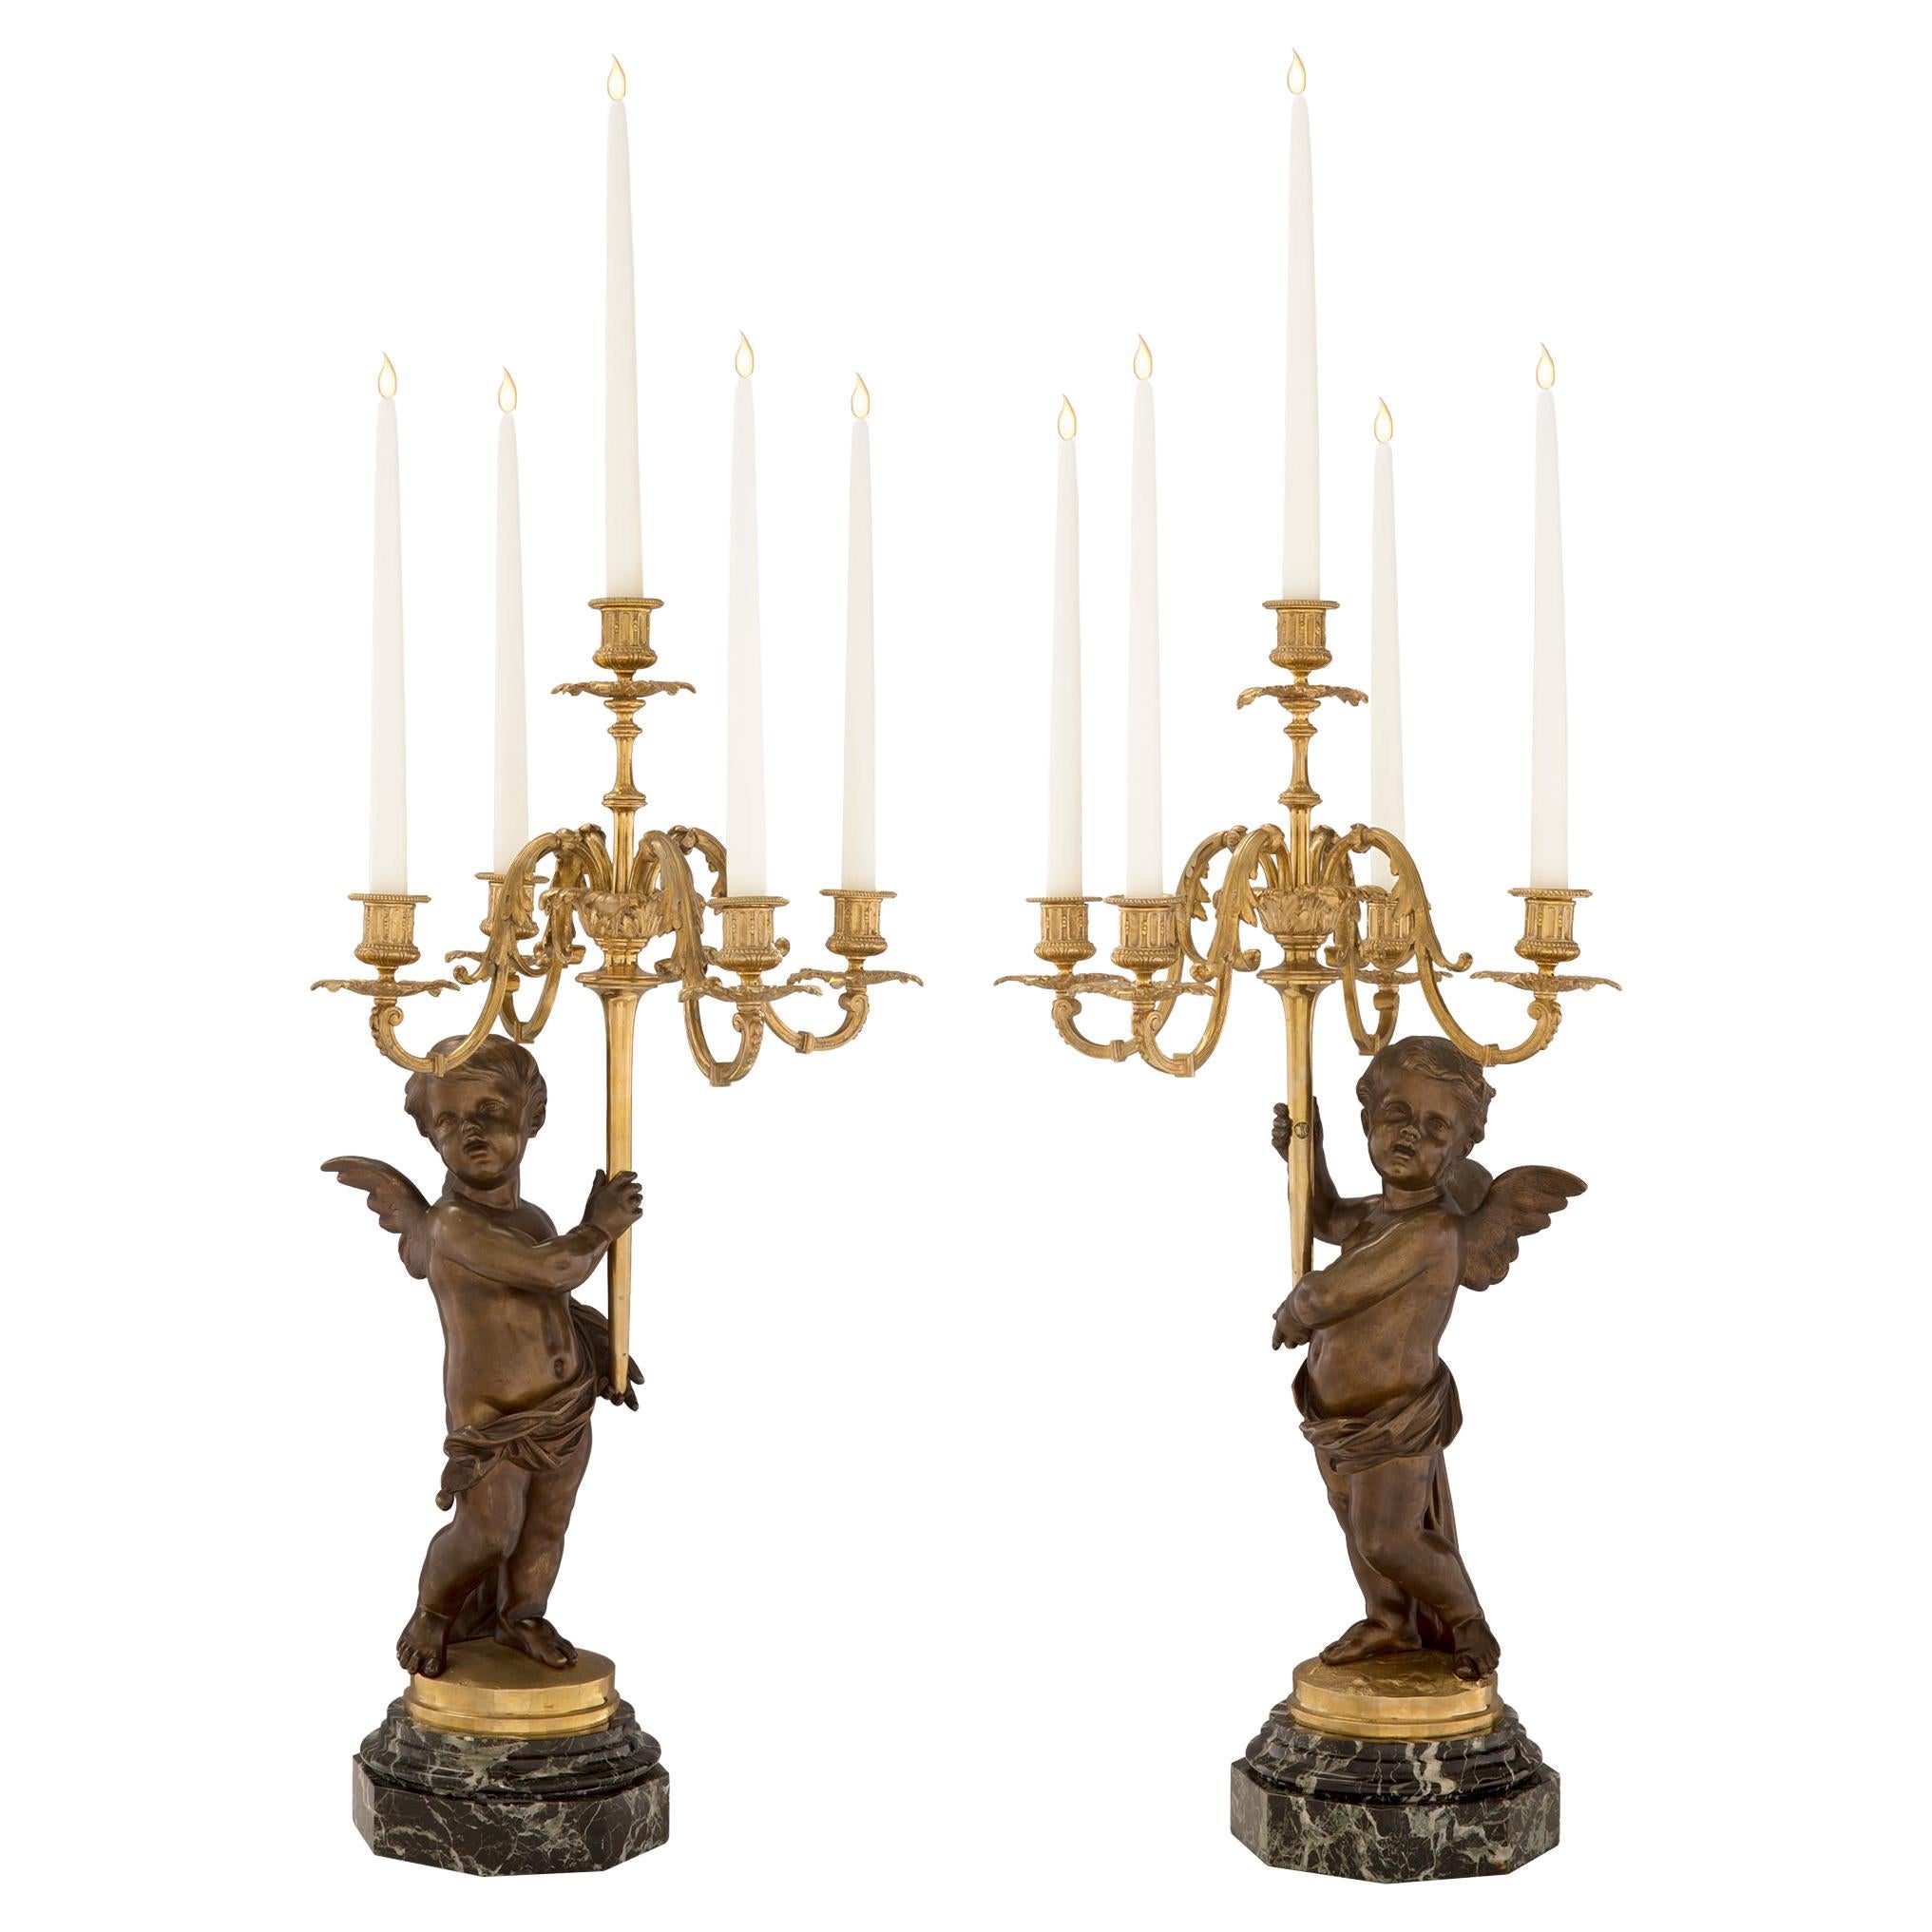 Pair of French 19th Century Louis XVI Style Winged Cherub Candelabras For Sale